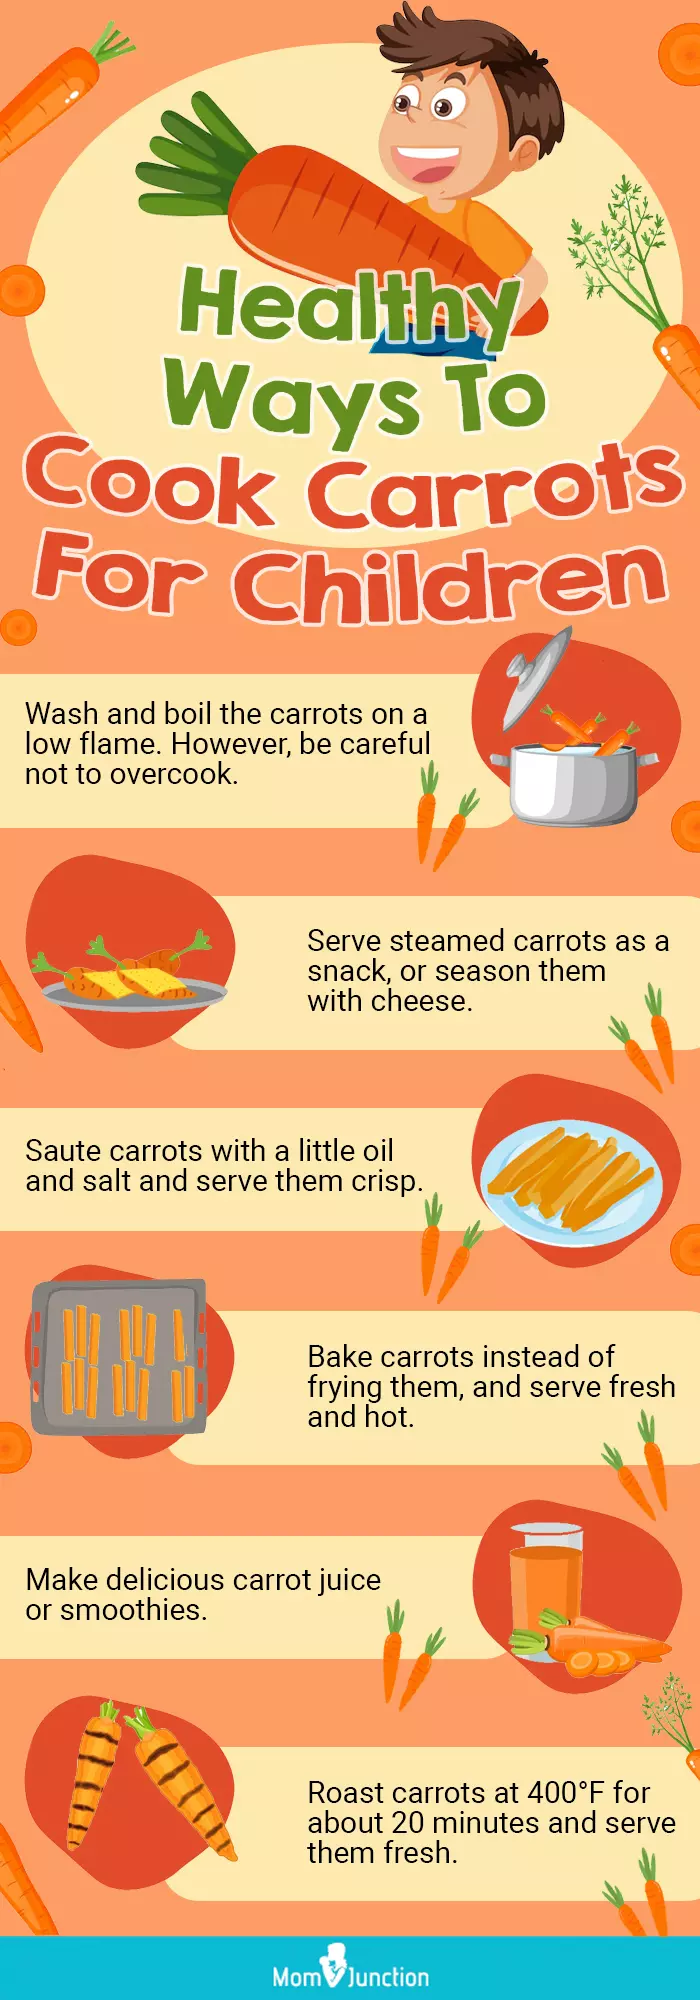 healthy ways to cook carrots for children (infographic)